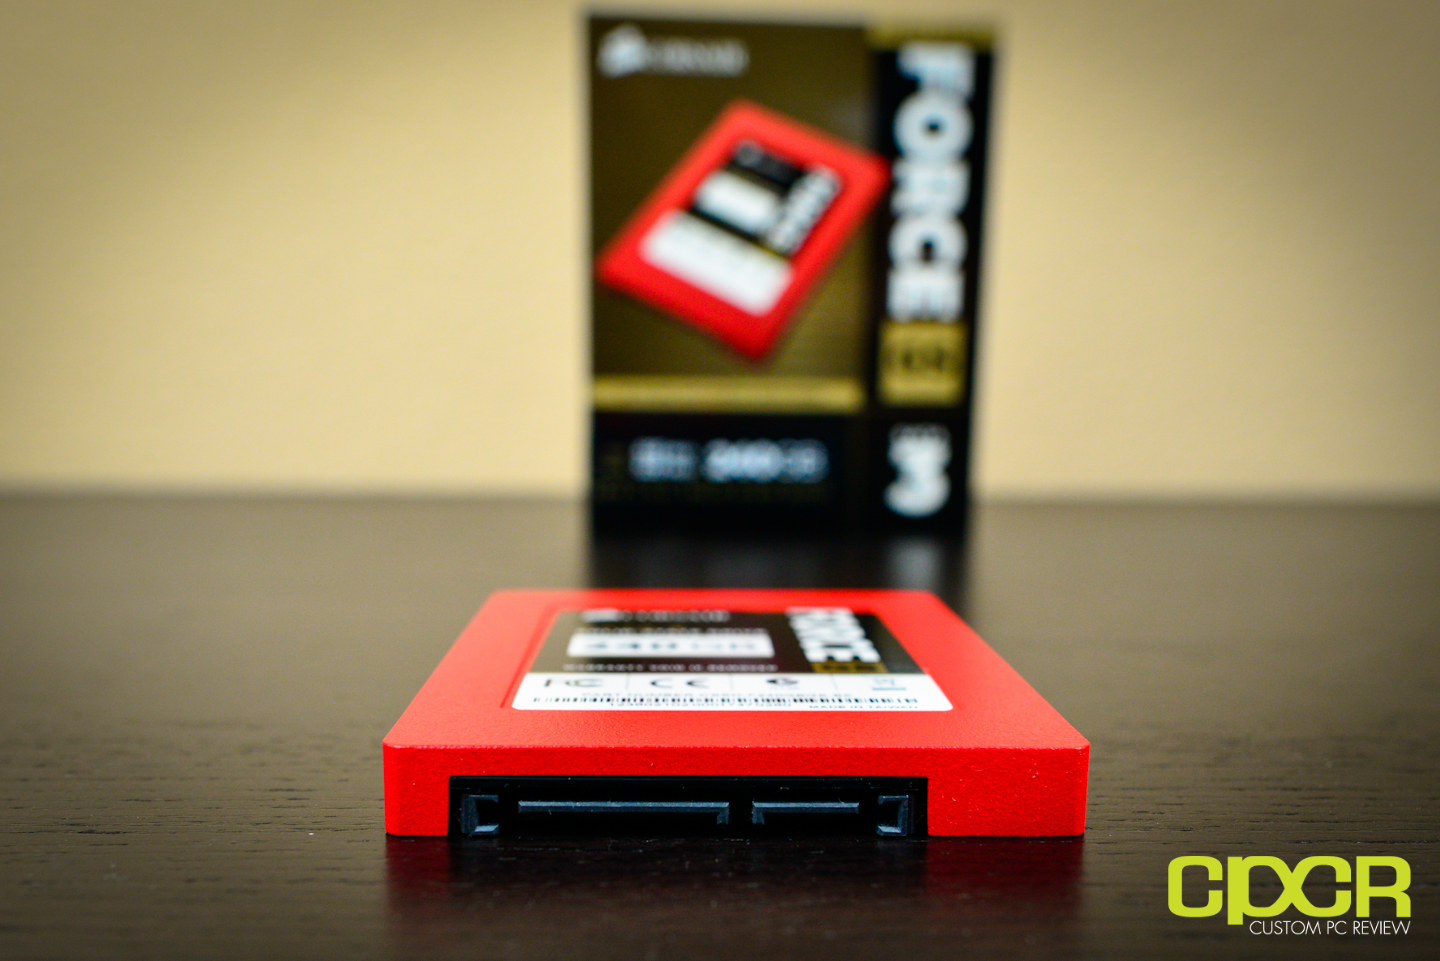 Corsair Force GS 240GB SSD review